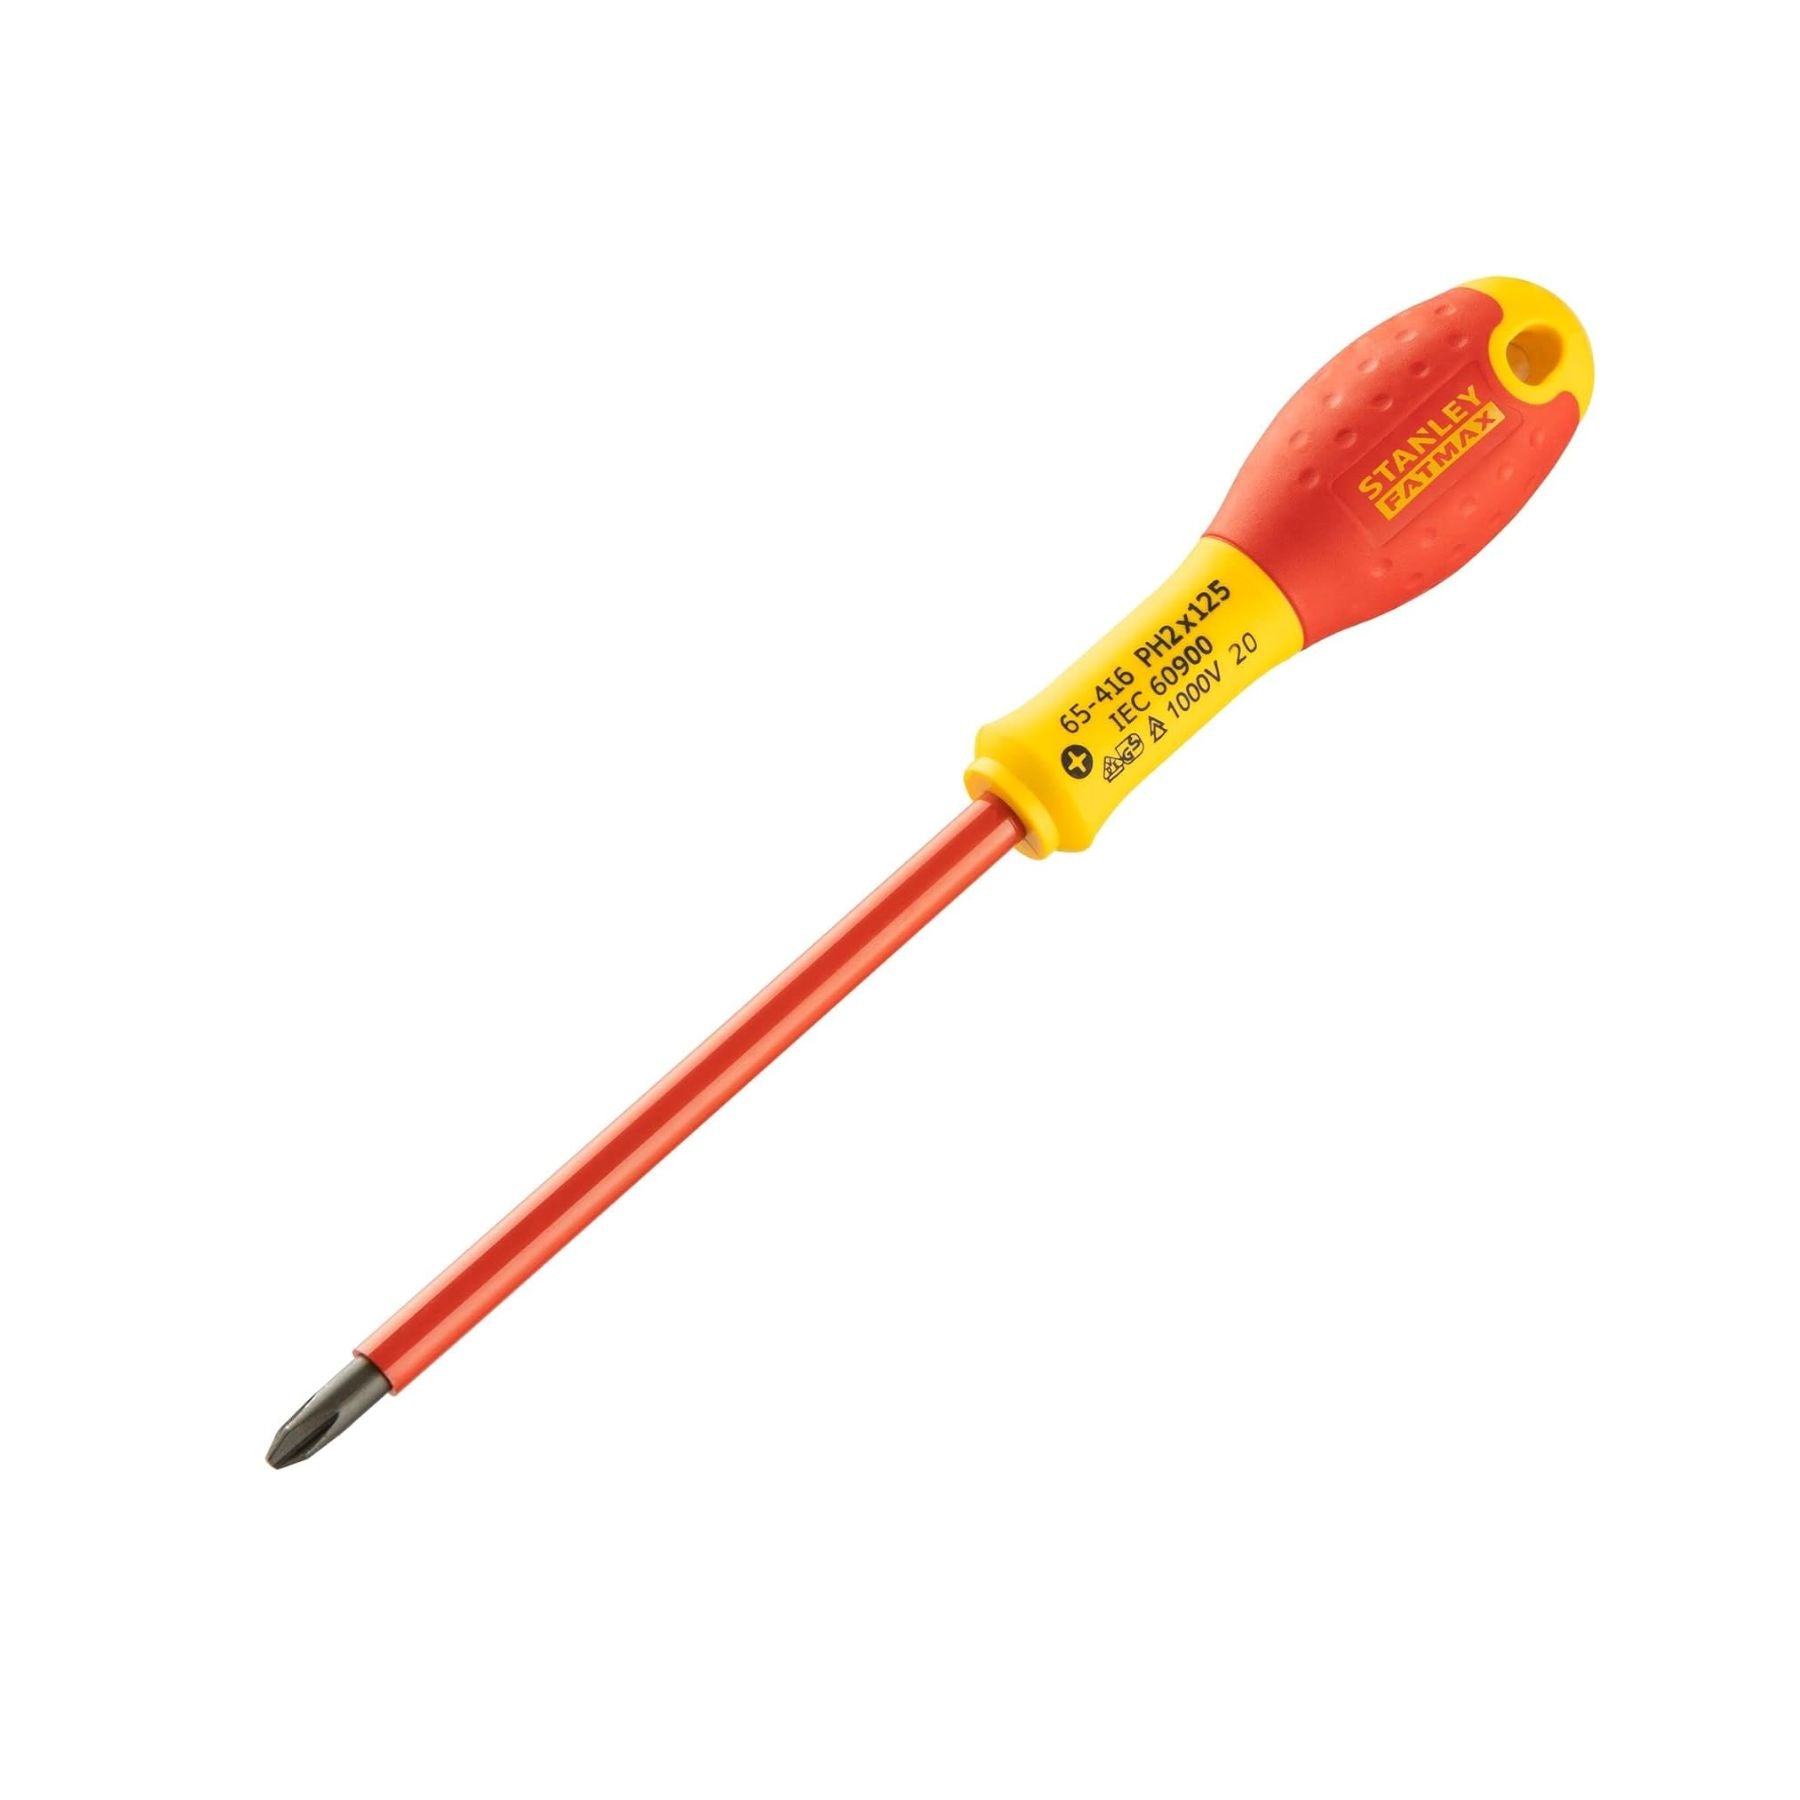 Stanley 0-65-416 VDE Screwdrivers Red/Yellow